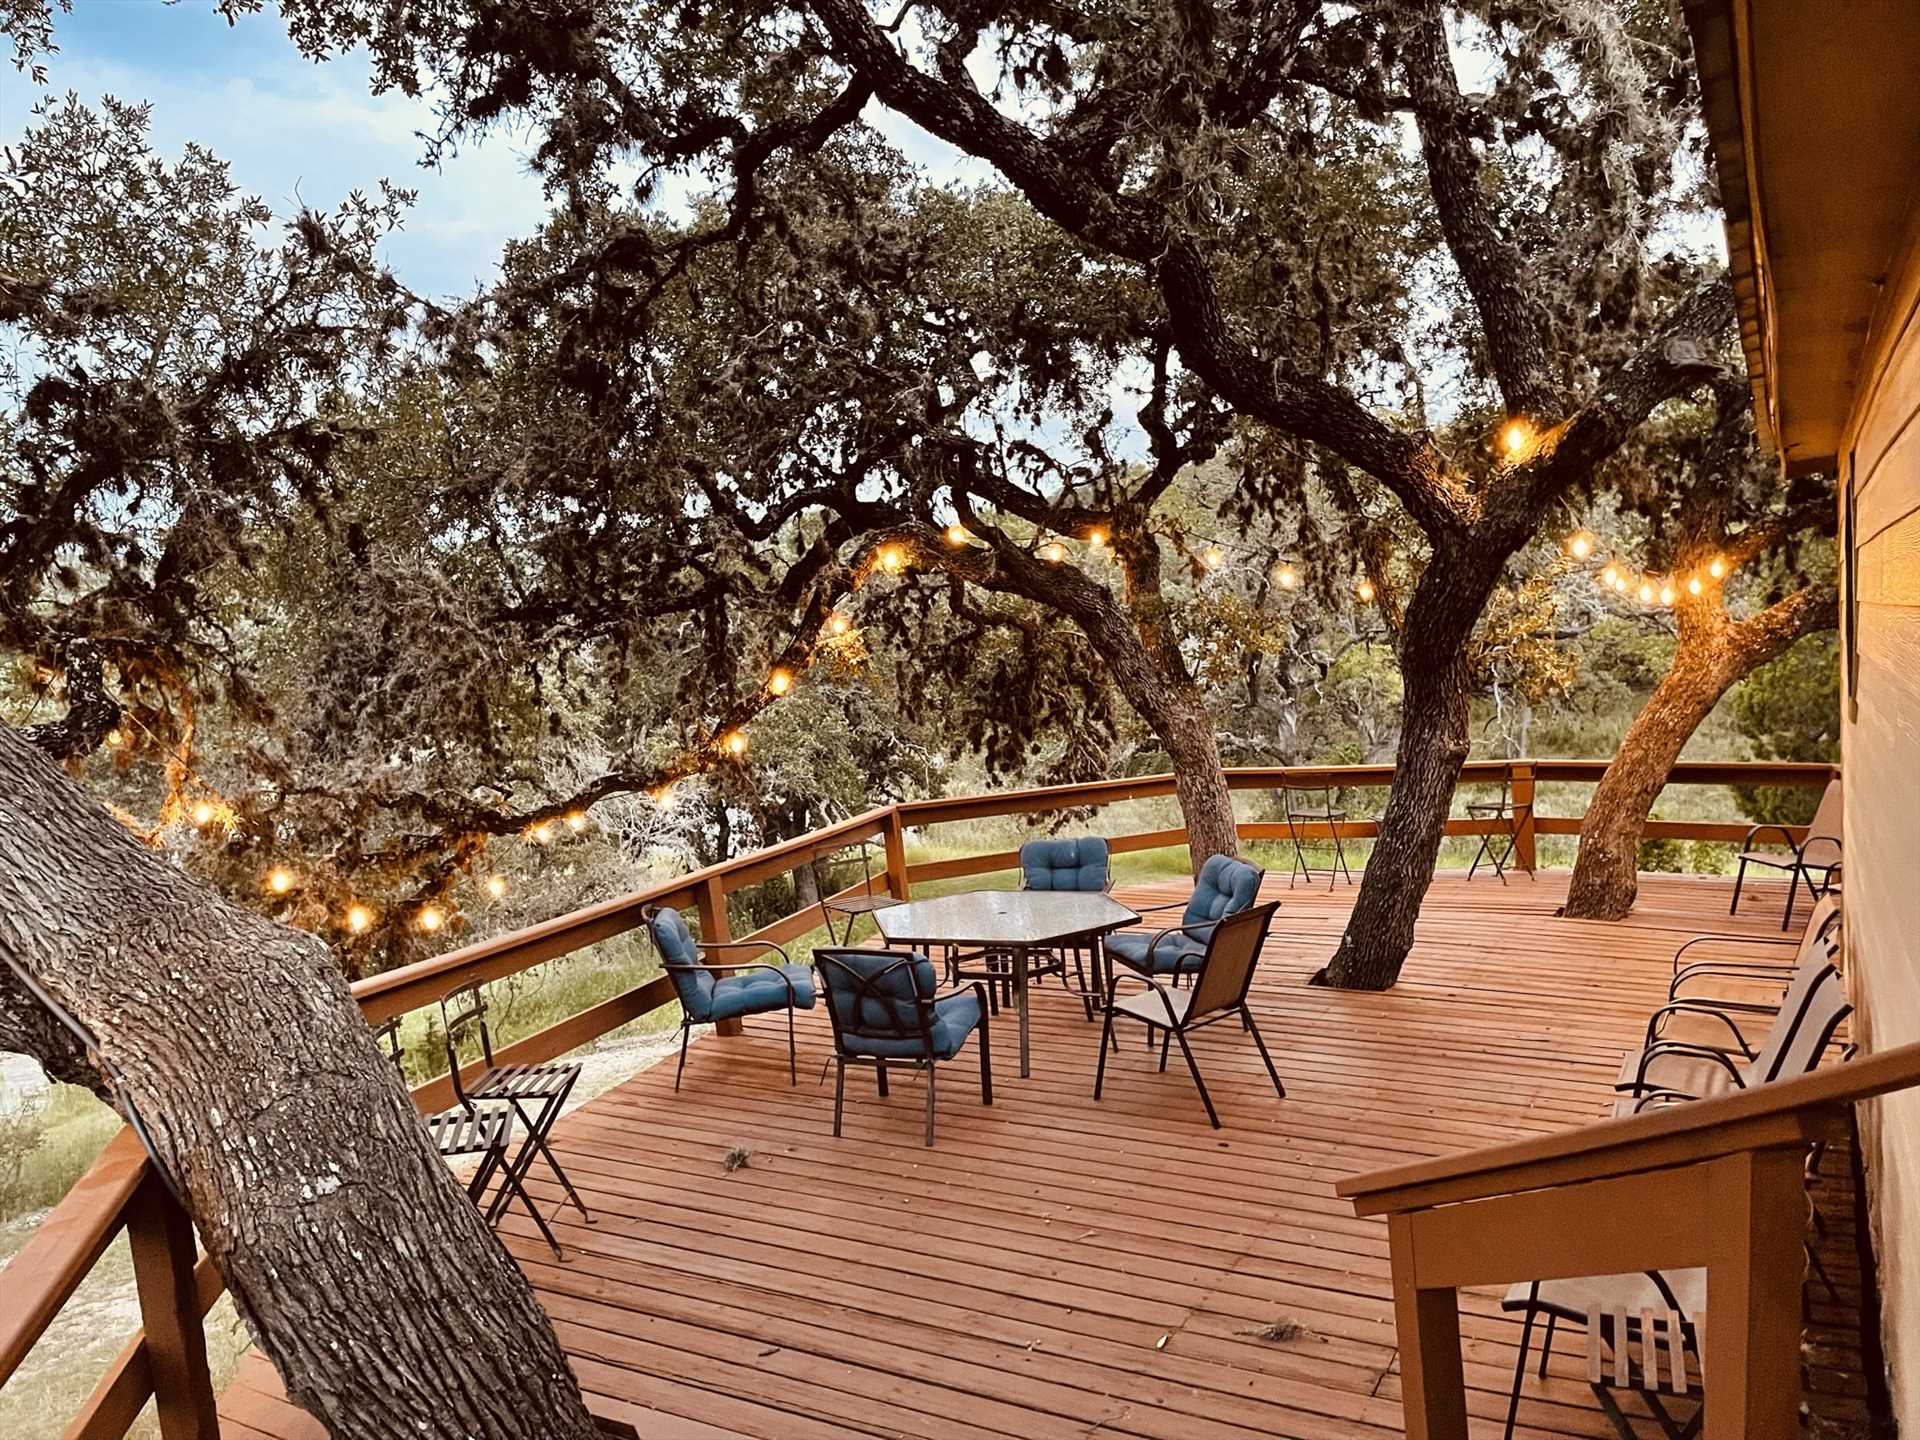                                                 Trees sprout right up through Rio Vista's roomy deck to provide cooling shade as you enjoy the view!